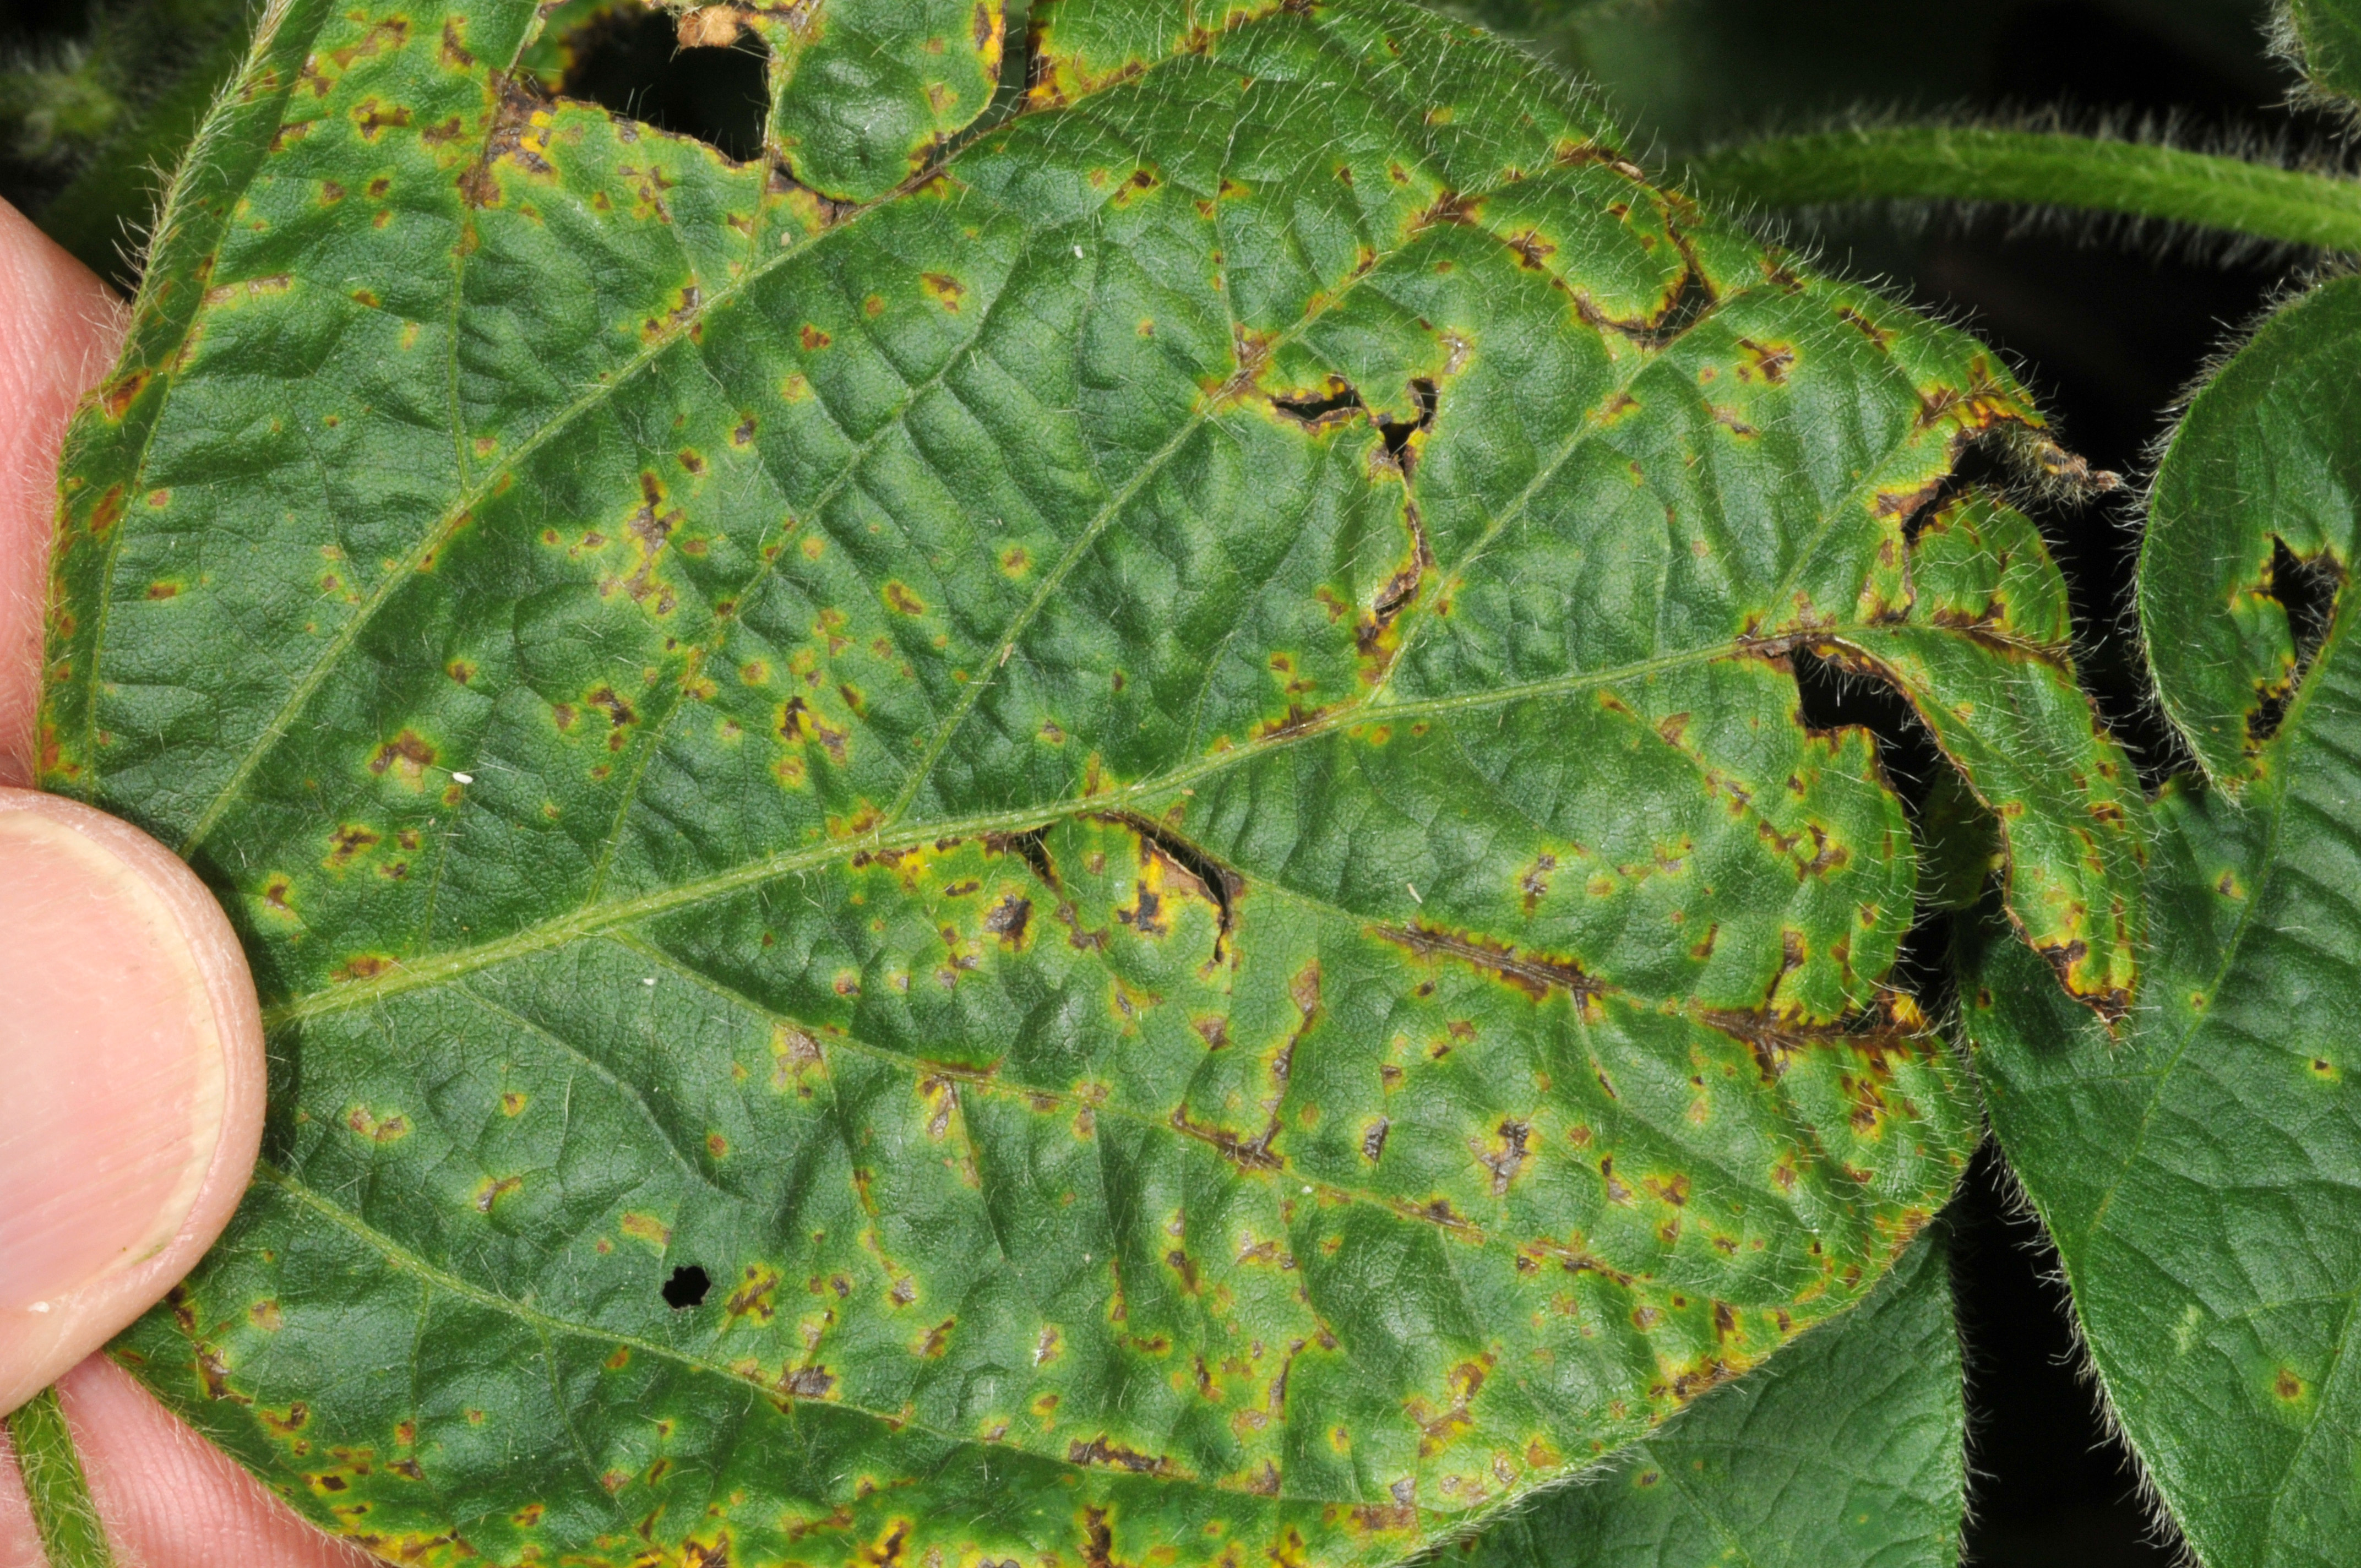 Figure 1. Angular lesions with a yellow halo and tattered leaves in the upper canopy are symptomatic of bacterial blight. (Picture courtesy Corey Gerber).